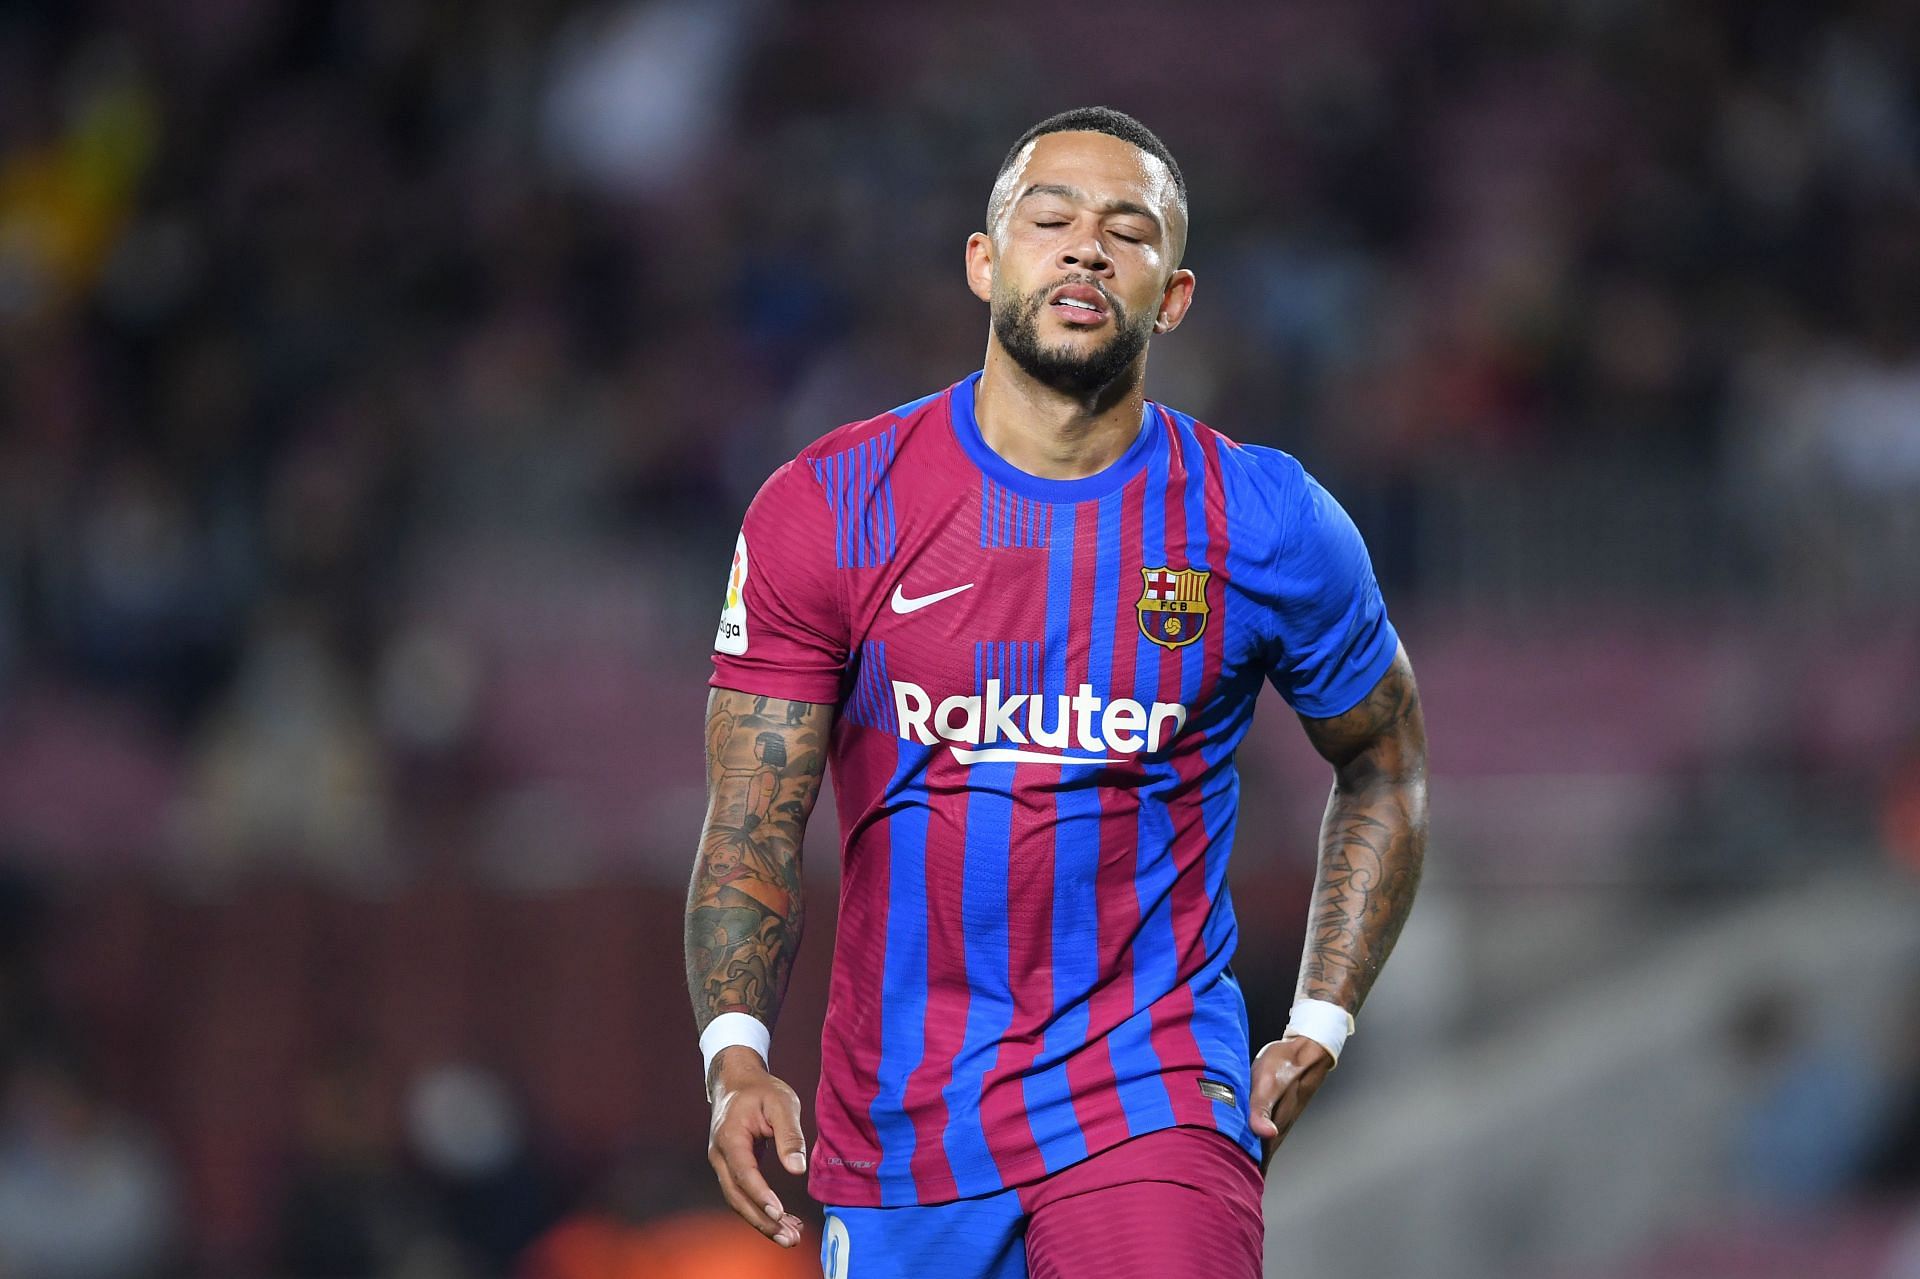 Depay is off to a promising start at Barcelona,